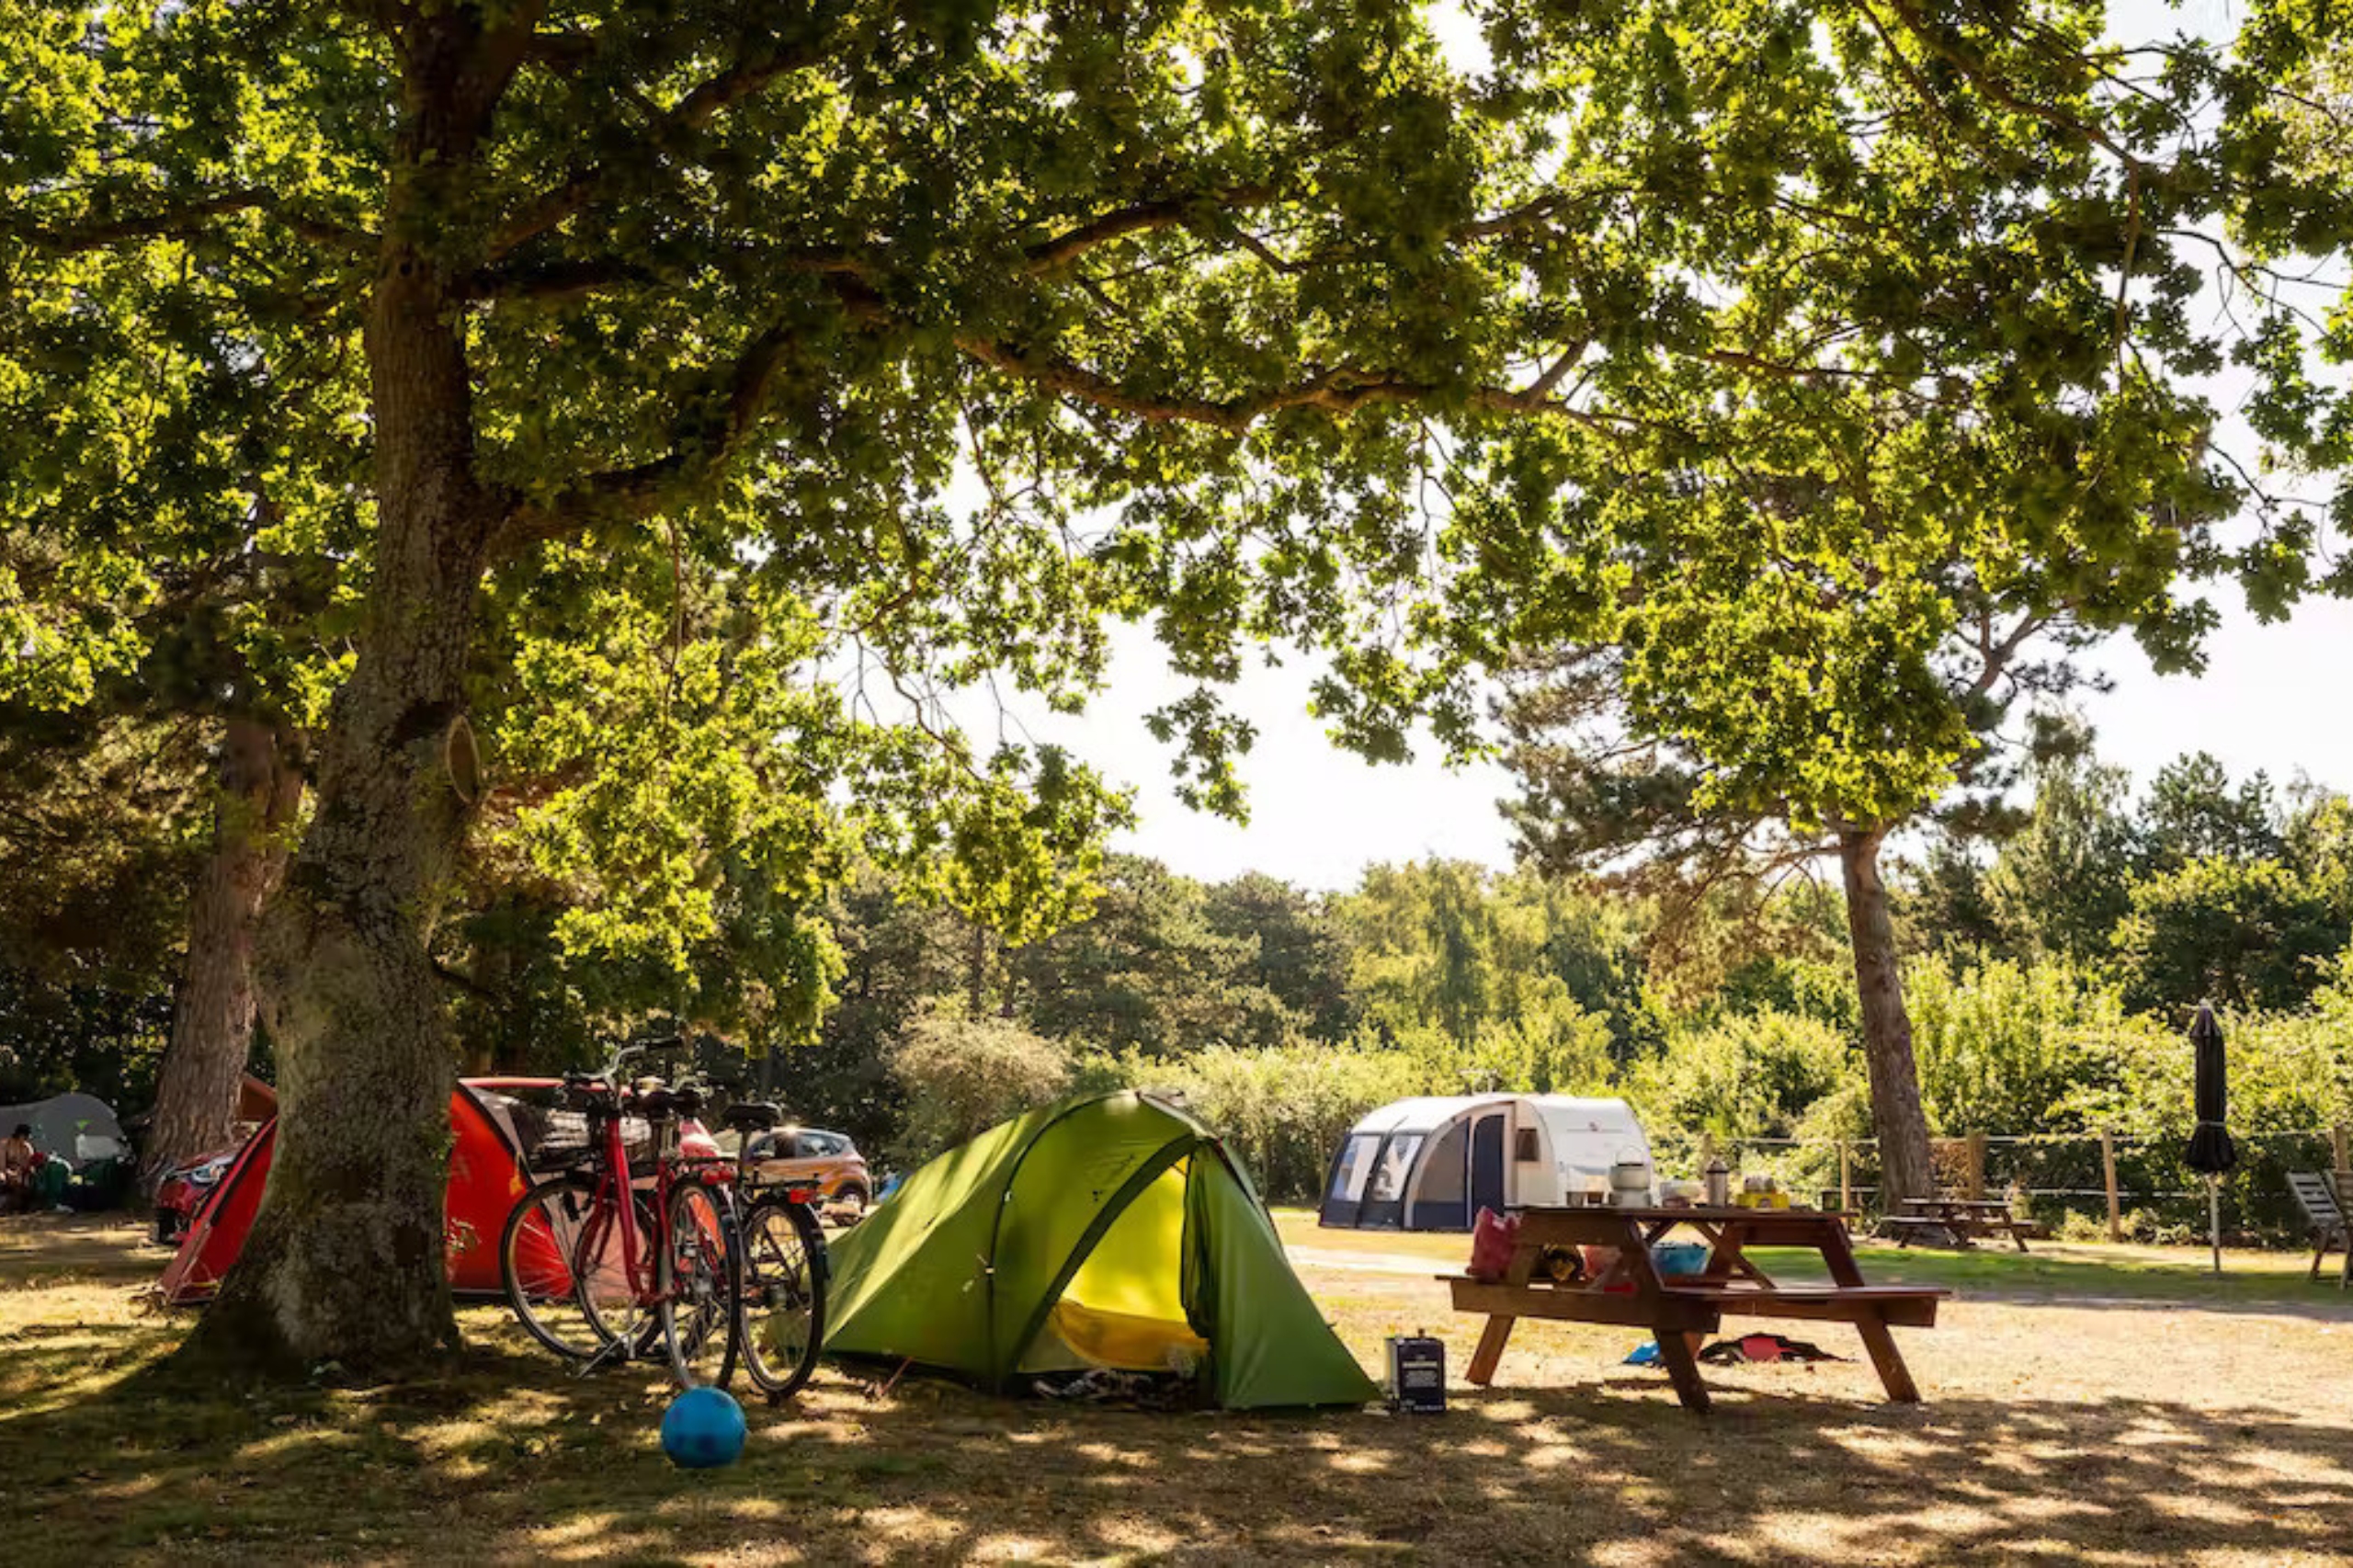 The campsite is surrounded by nature and offers a picturesque setting for your holiday on Bornholm.